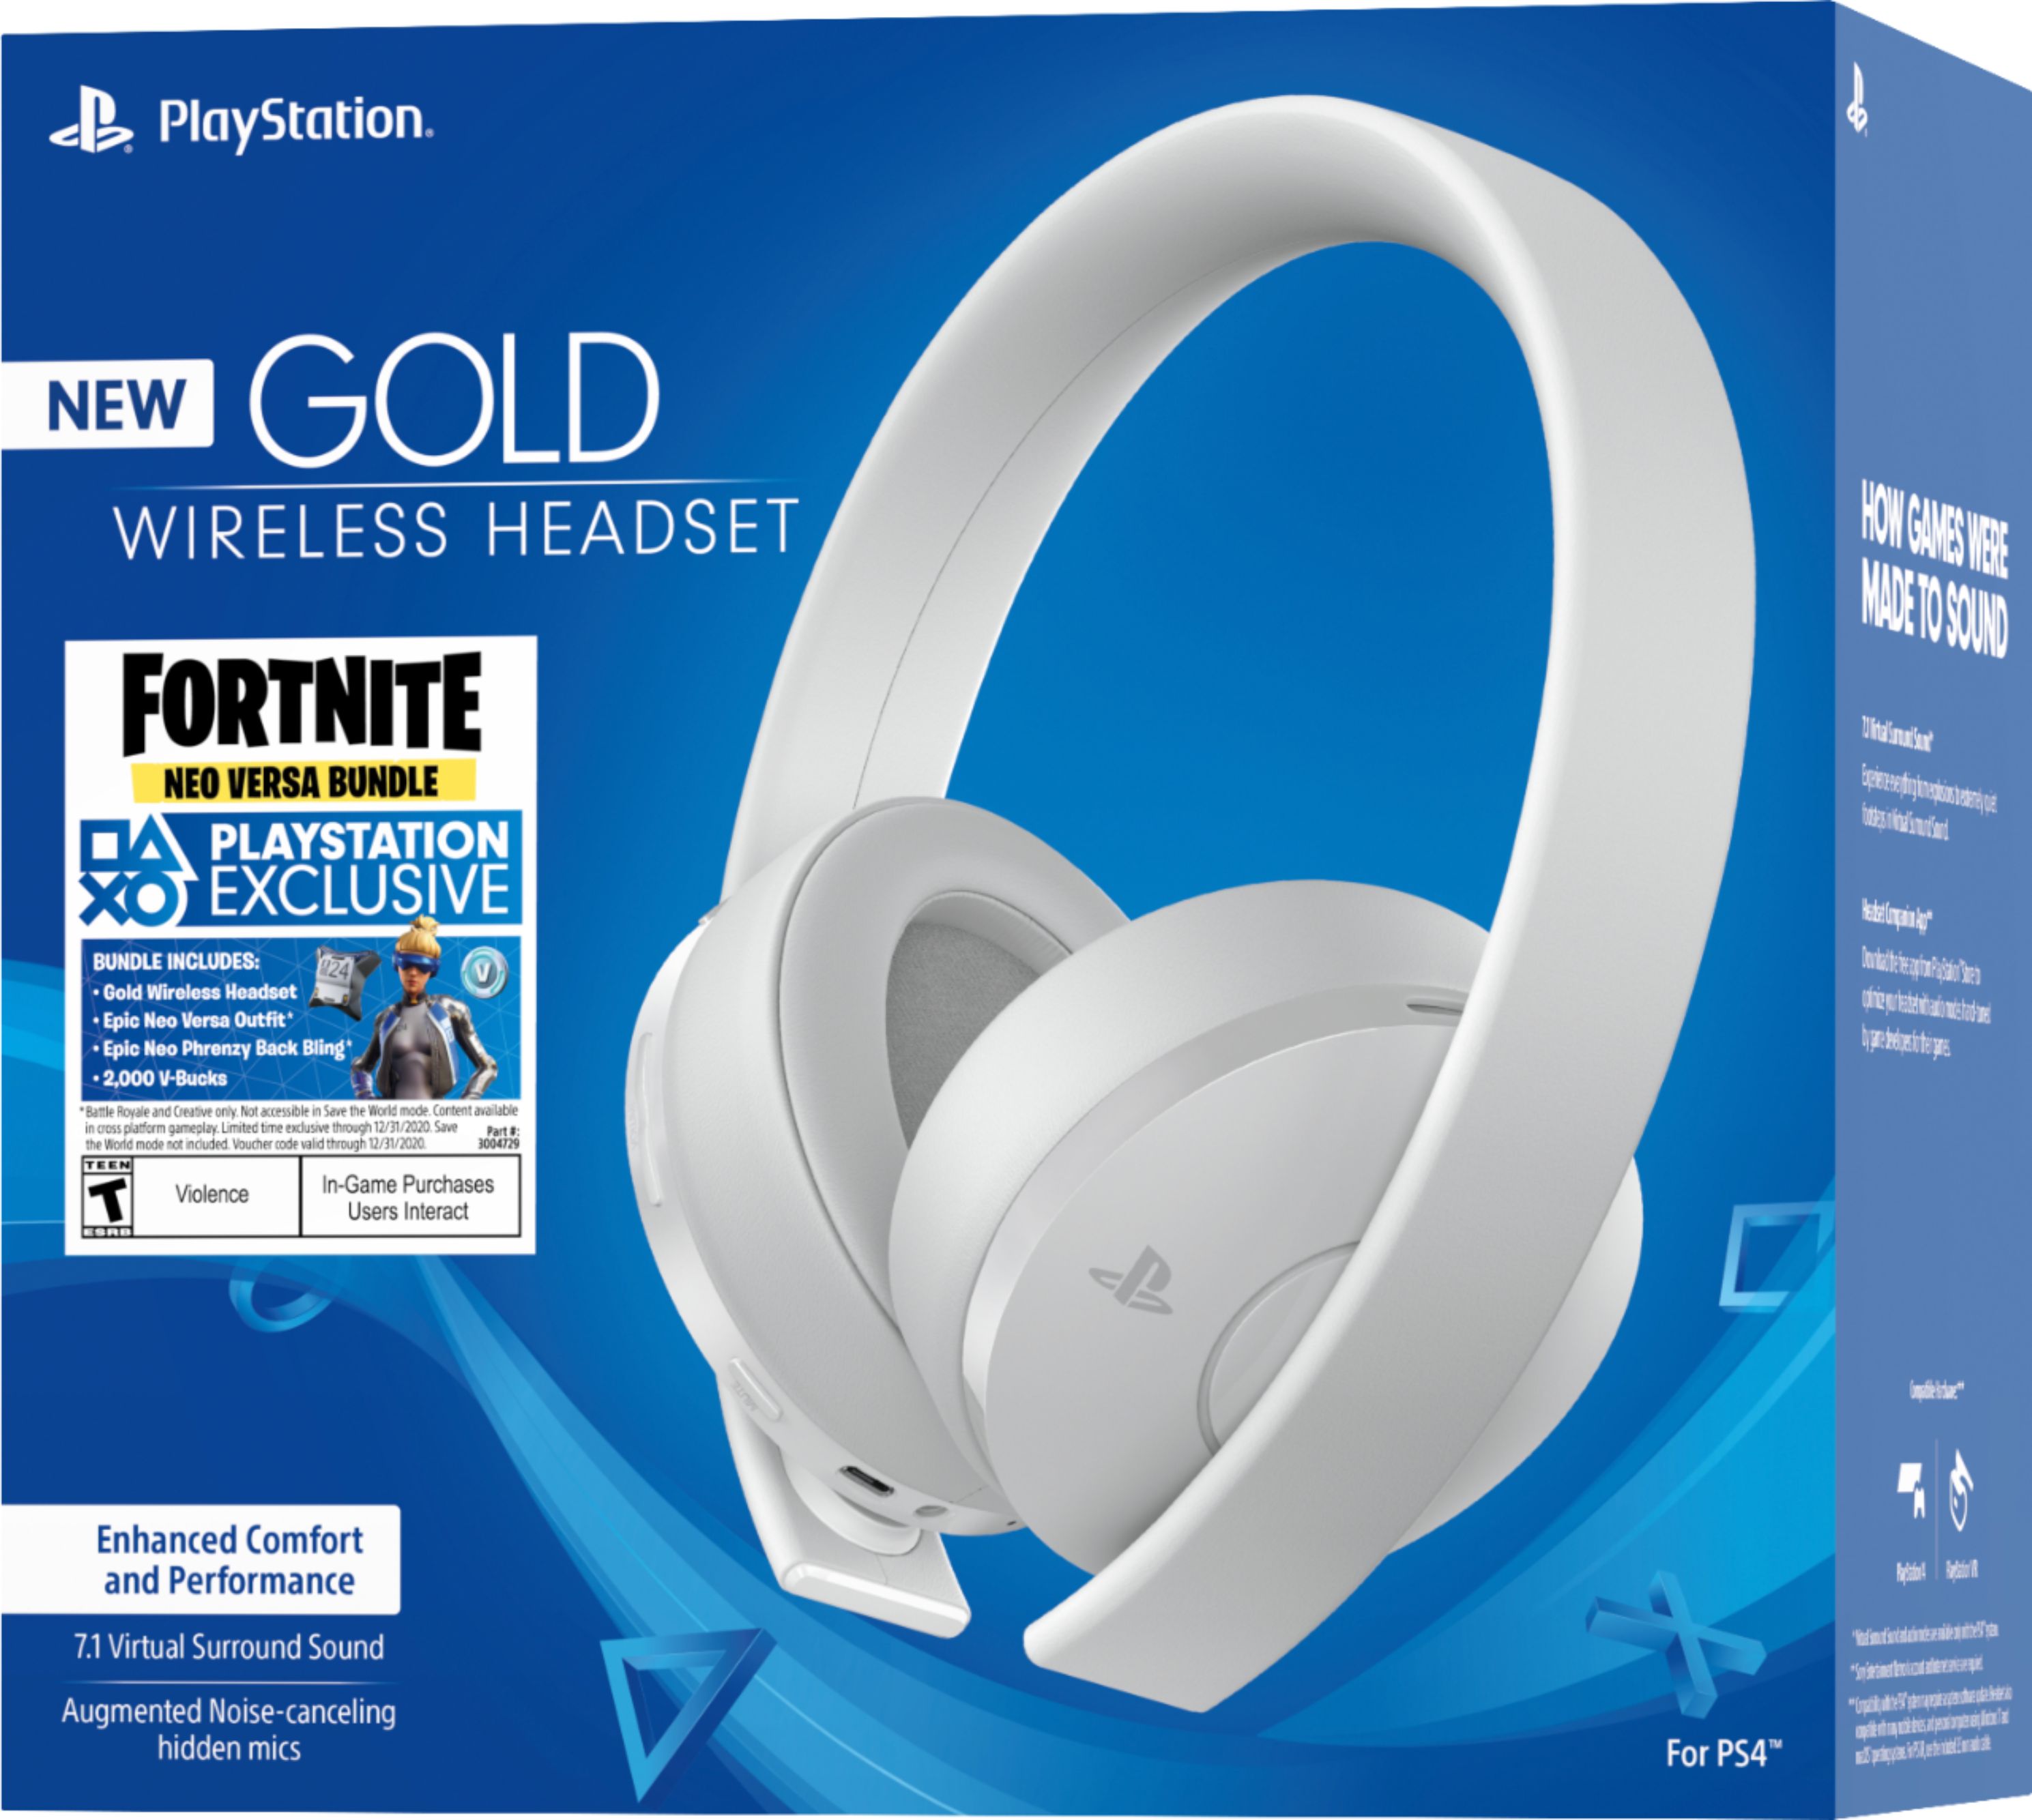 sony playstation gold wireless headset 7.1 surround sound ps4